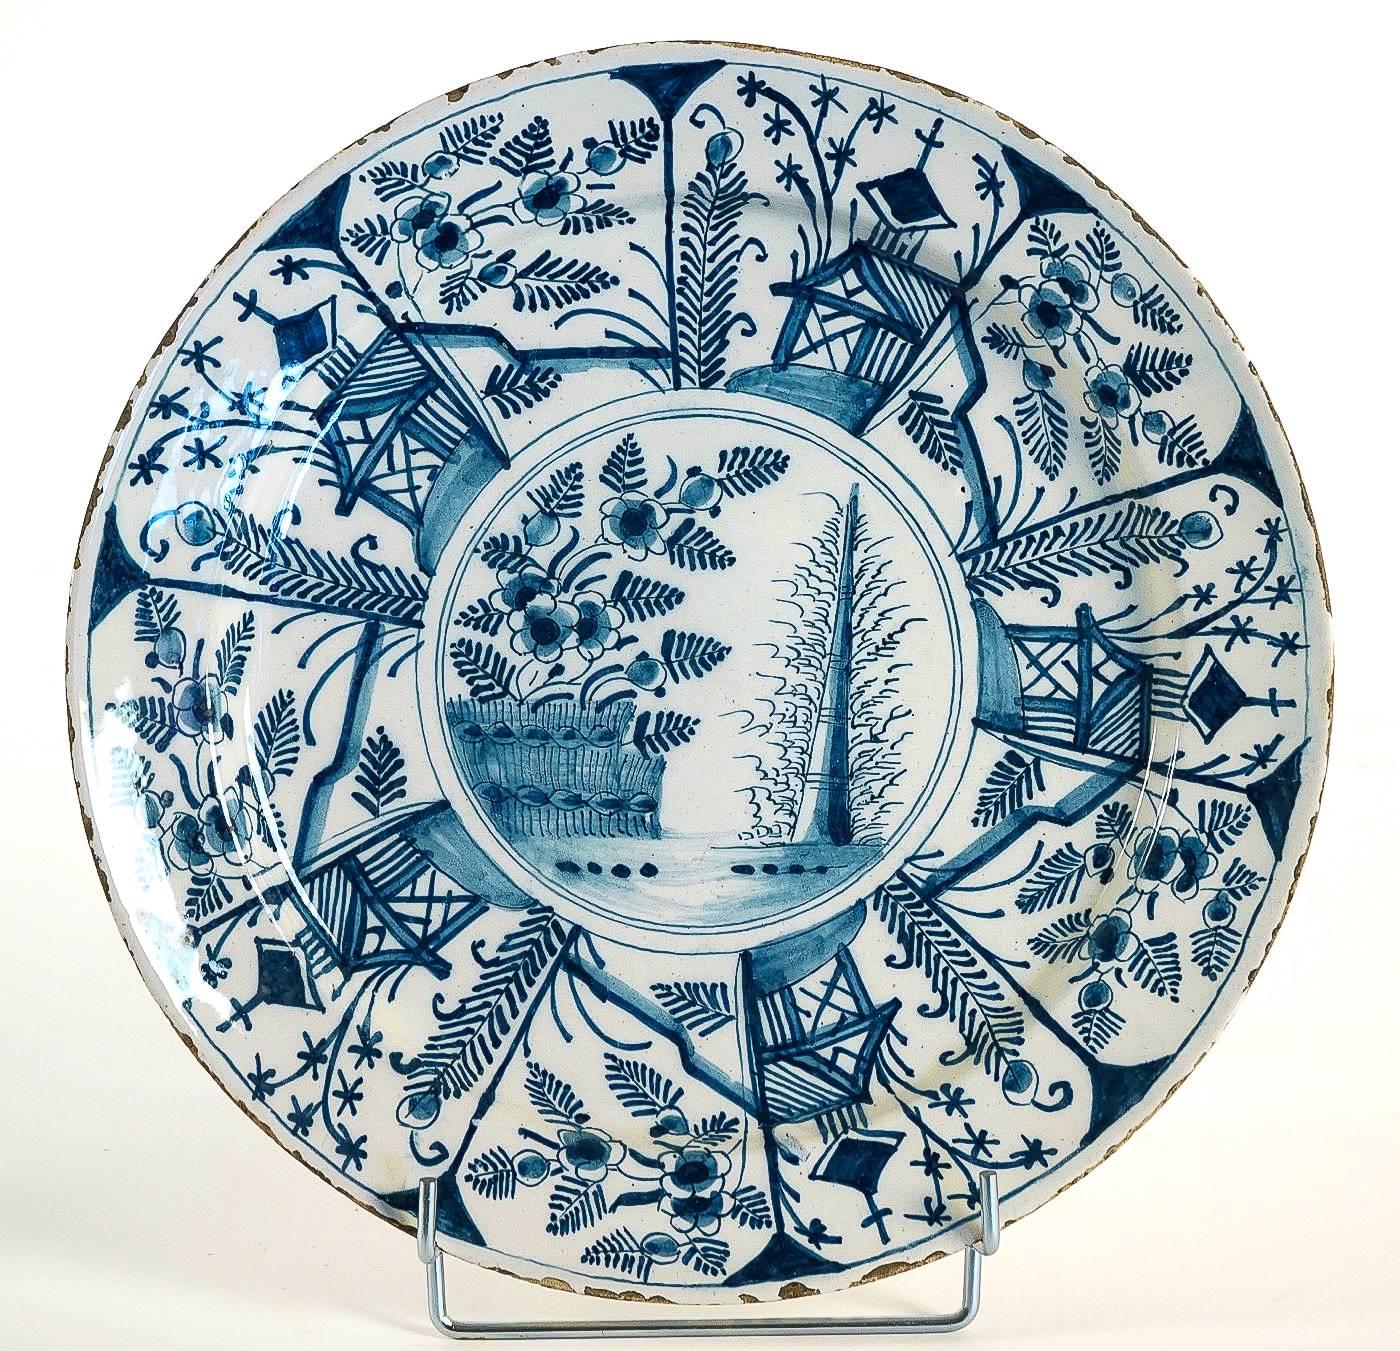 We are pleased to present you, a magnificent and rare Delft faience plate, hand-painted in a blue cameo, depicting churches and in a centre flowers.
Our plate signed on the backside in blue, JJ, for Jan Jansz Van Der Laen who managed the Three